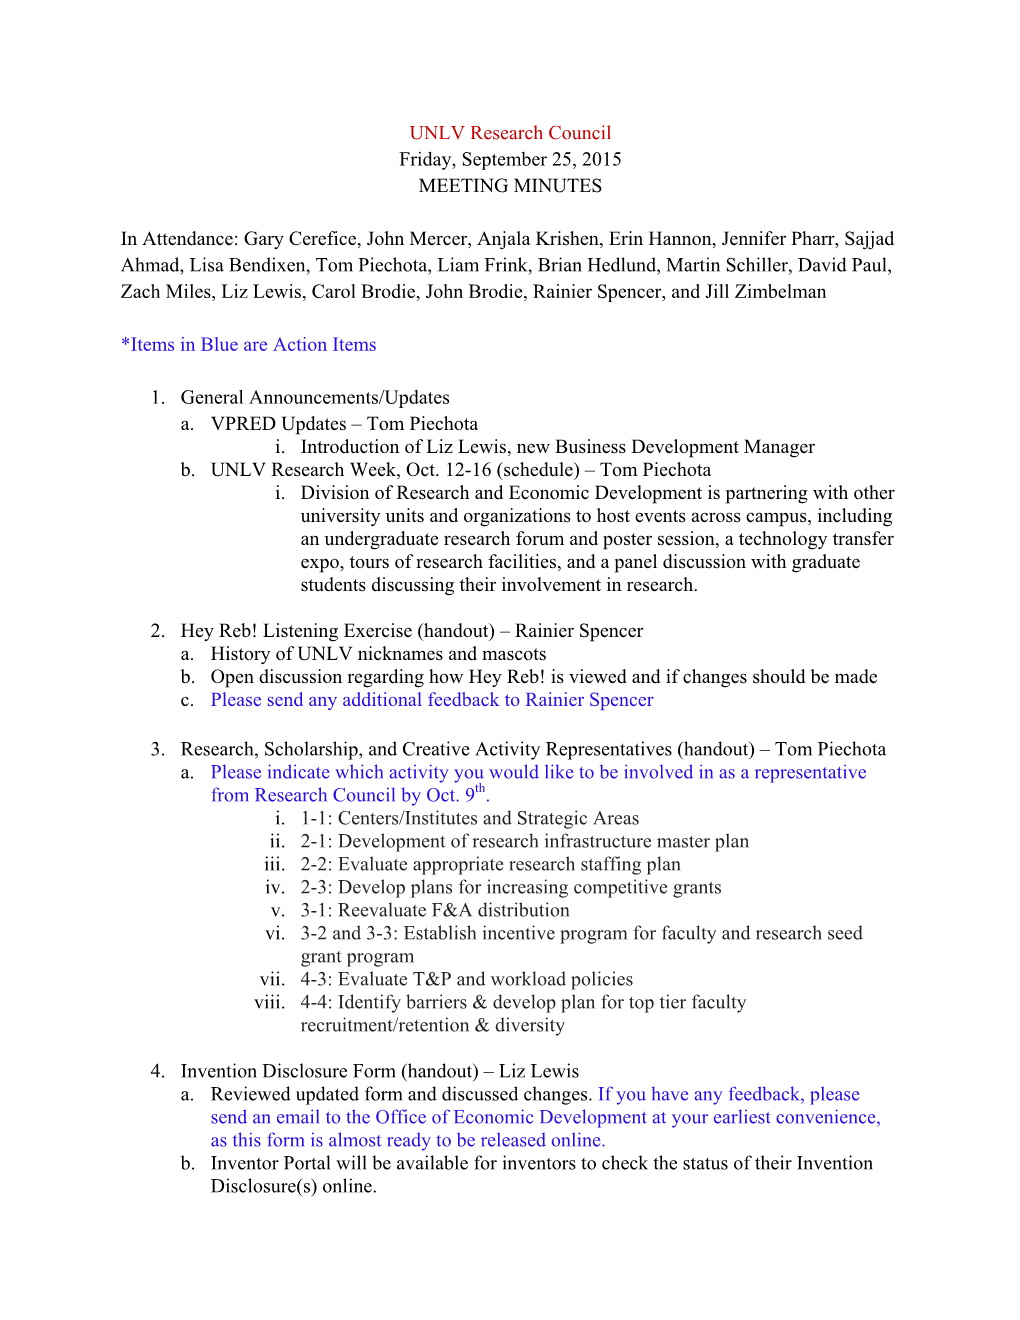 UNLV Research Council Friday, September 25, 2015 MEETING MINUTES